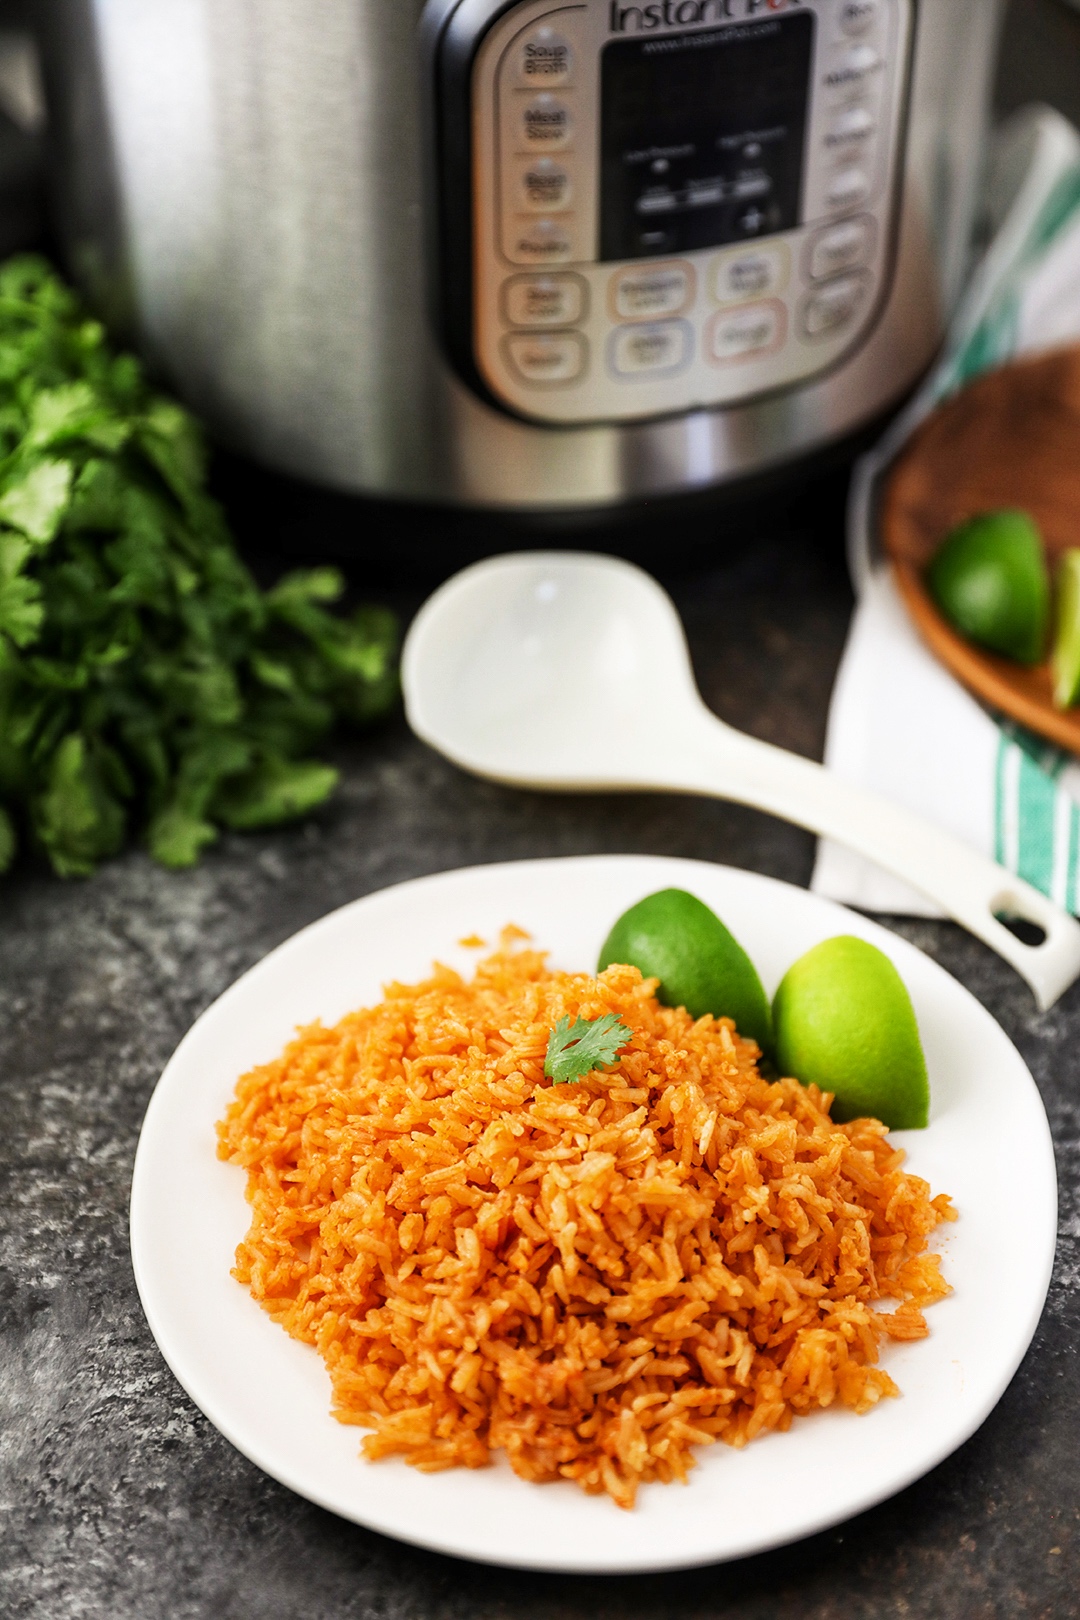 Easy Instant Pot Spanish Rice (Mexican Rice) - Piping Pot Curry